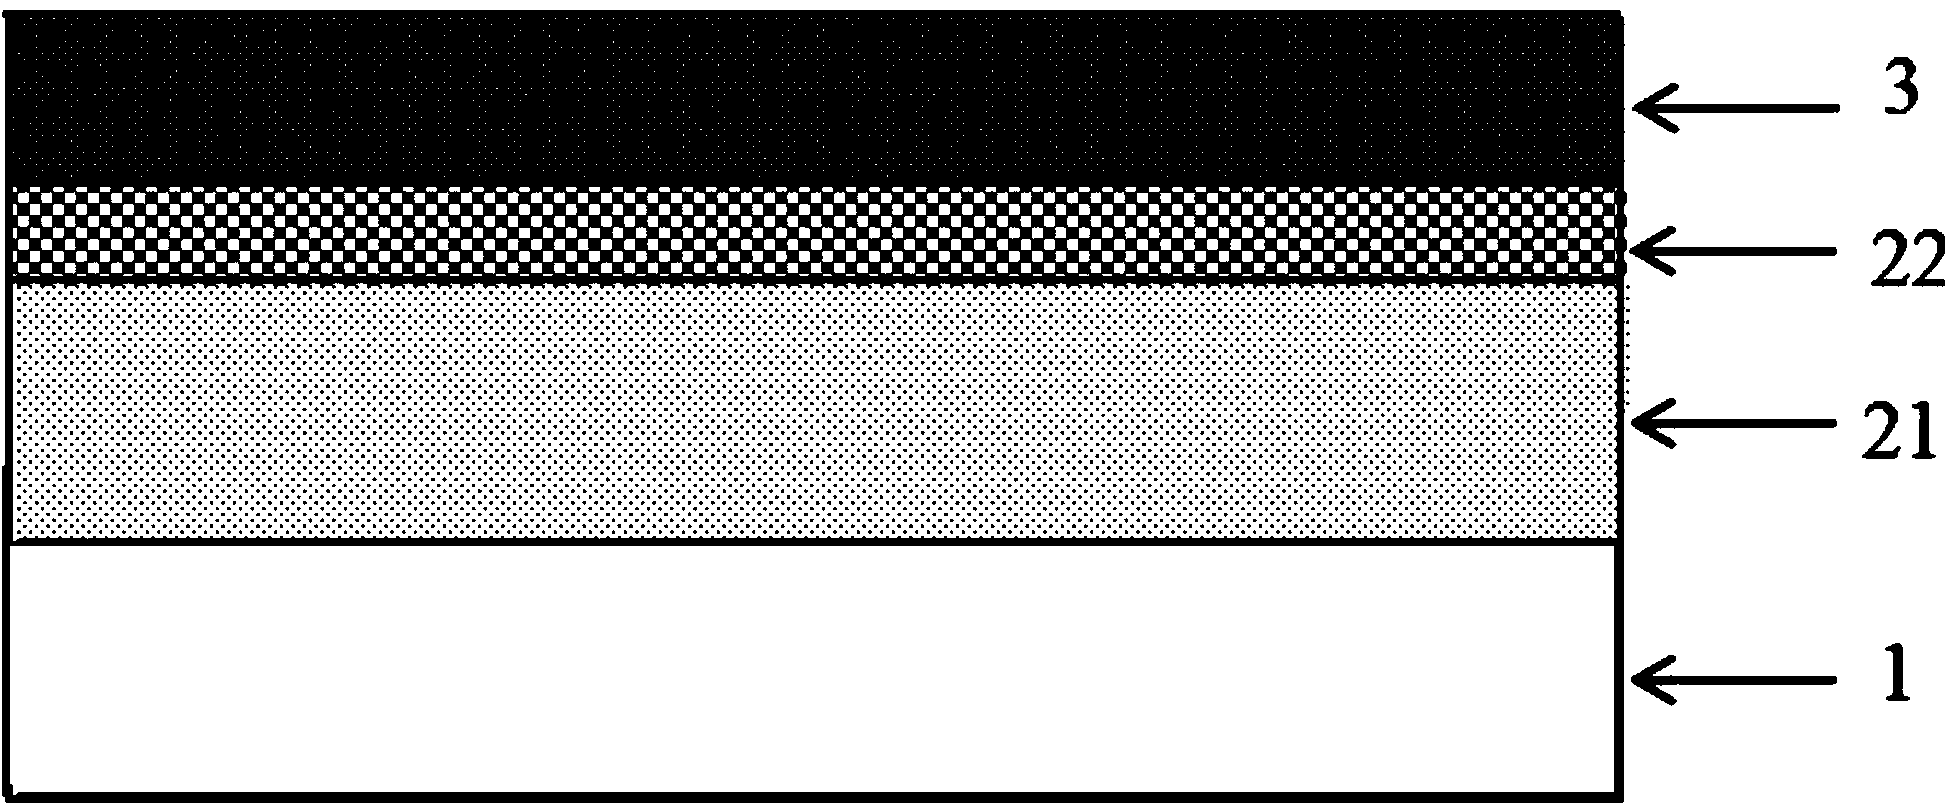 Method for manufacturing grid lines with high uniformity through double exposure